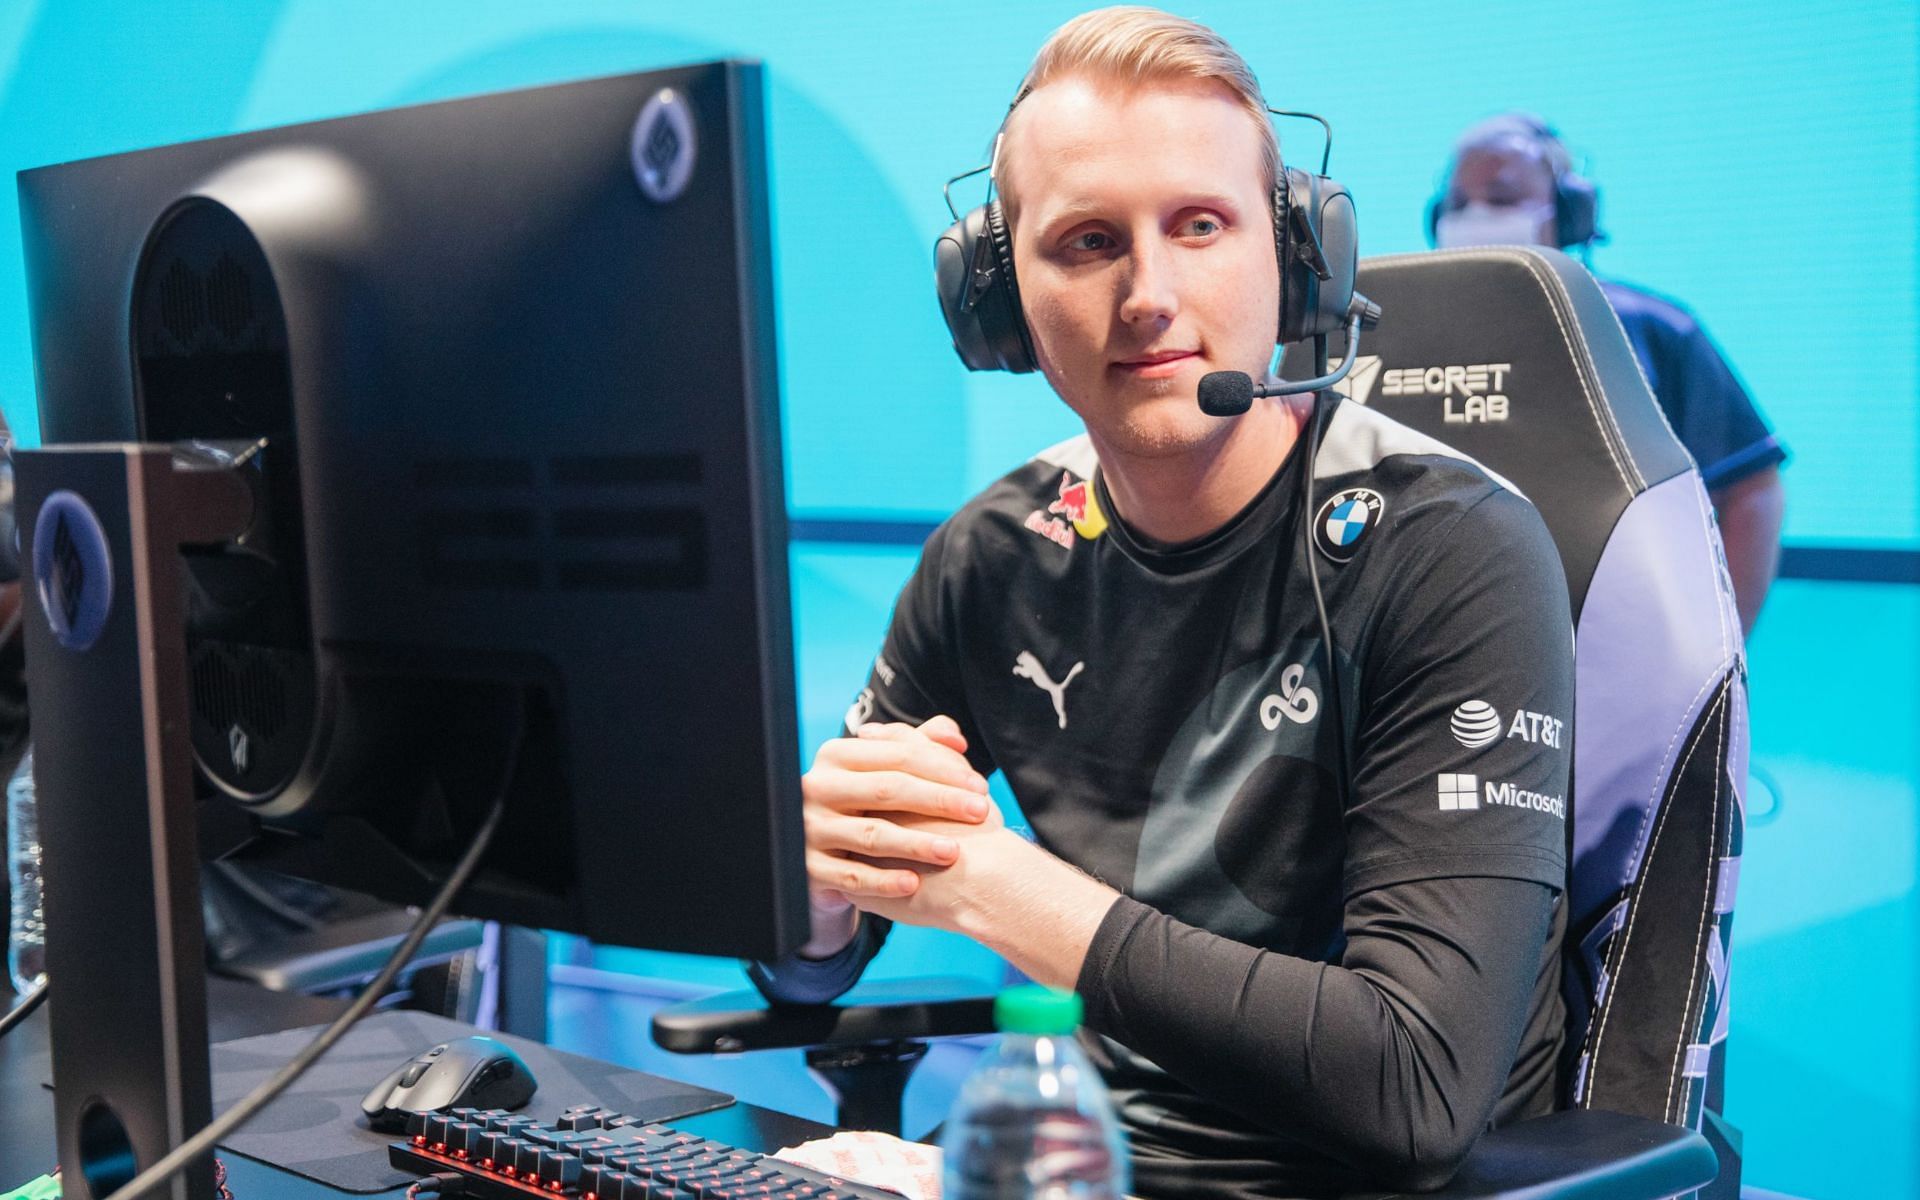 Zven was initially dropped for Berserker (Image via Riot Games)